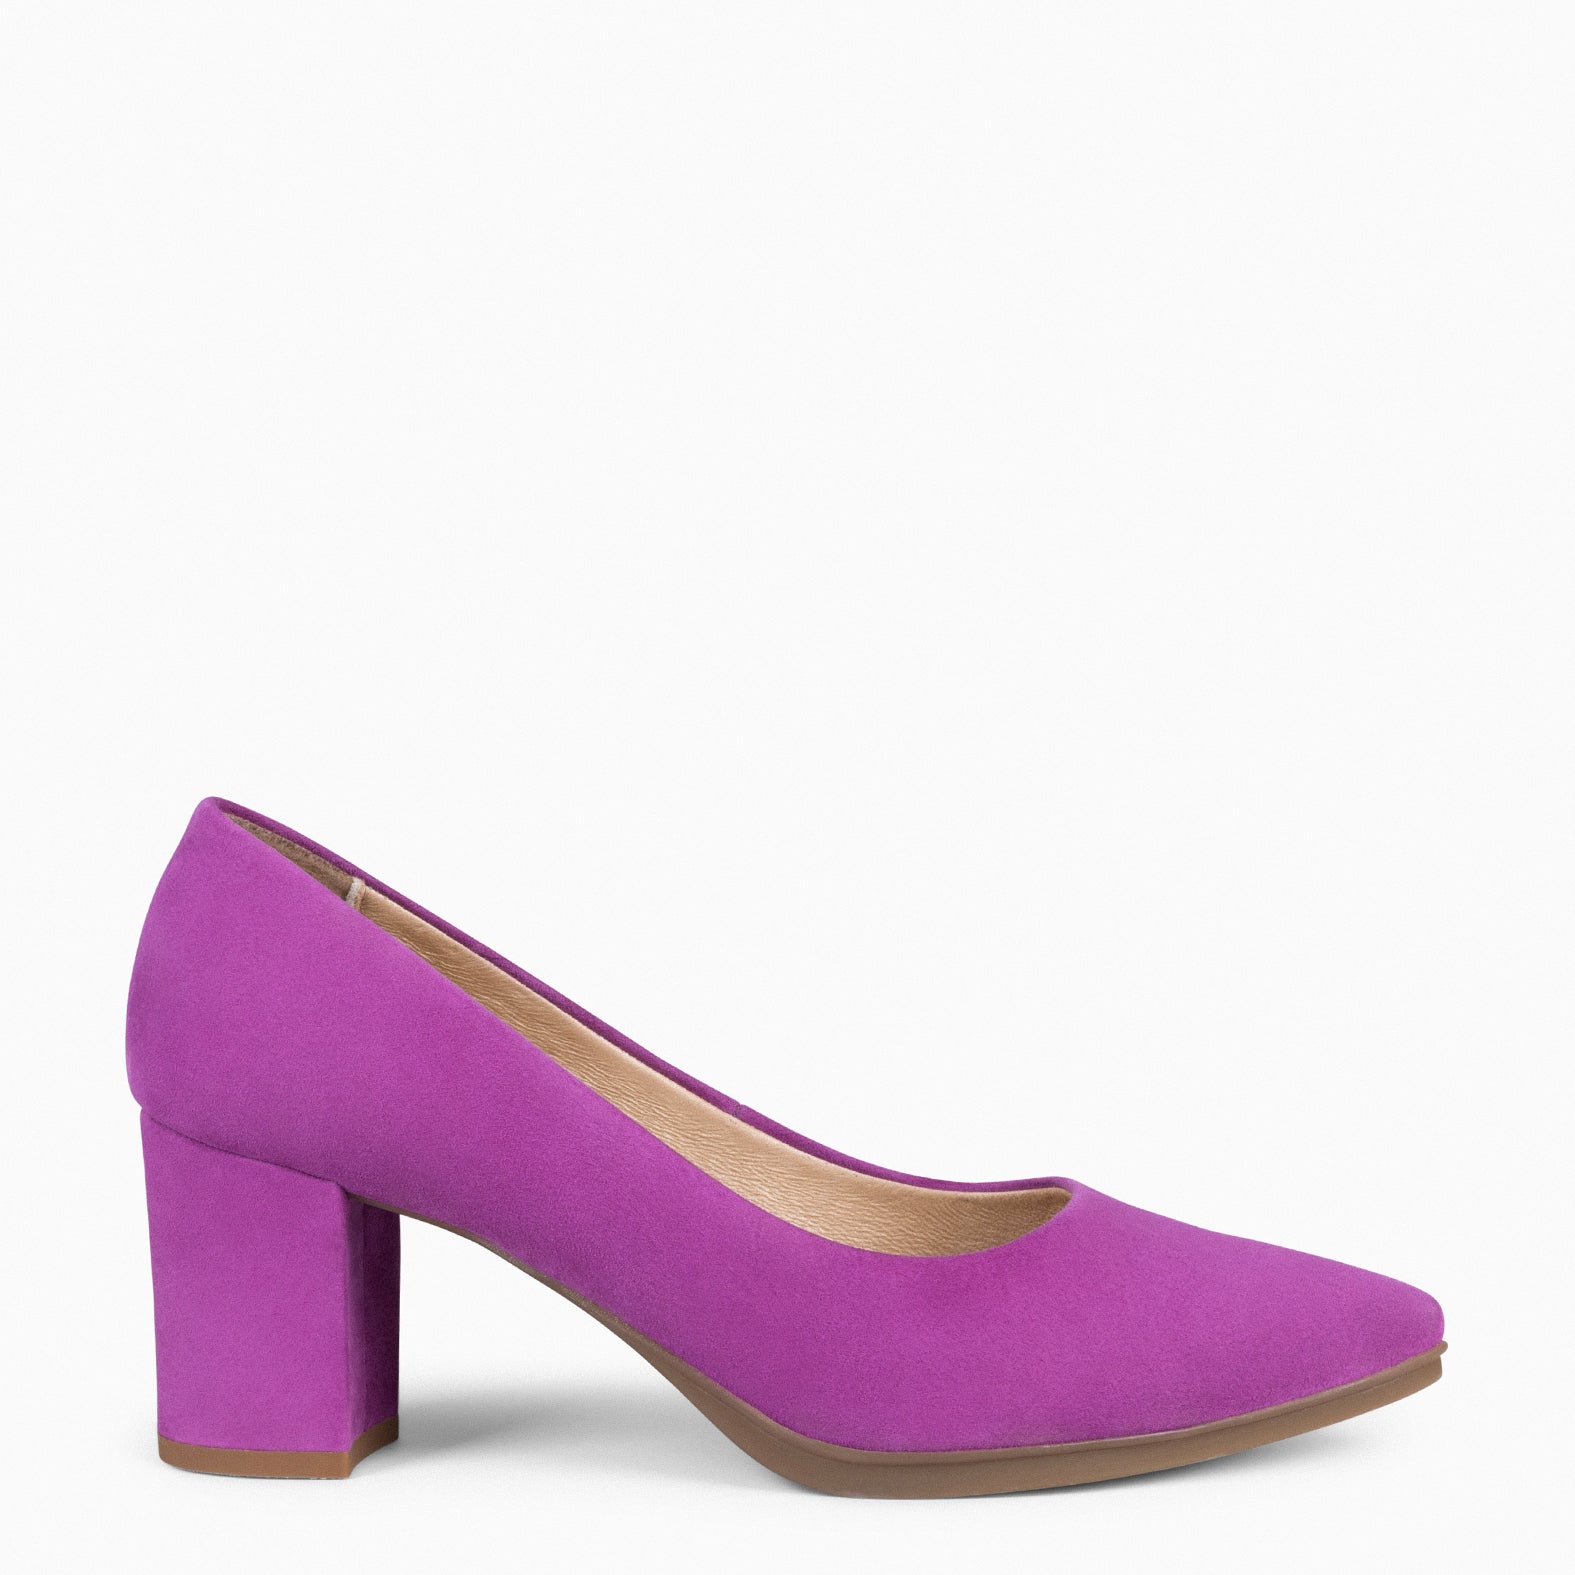 URBAN S – VIOLET Suede Mid-Heeled Shoes 